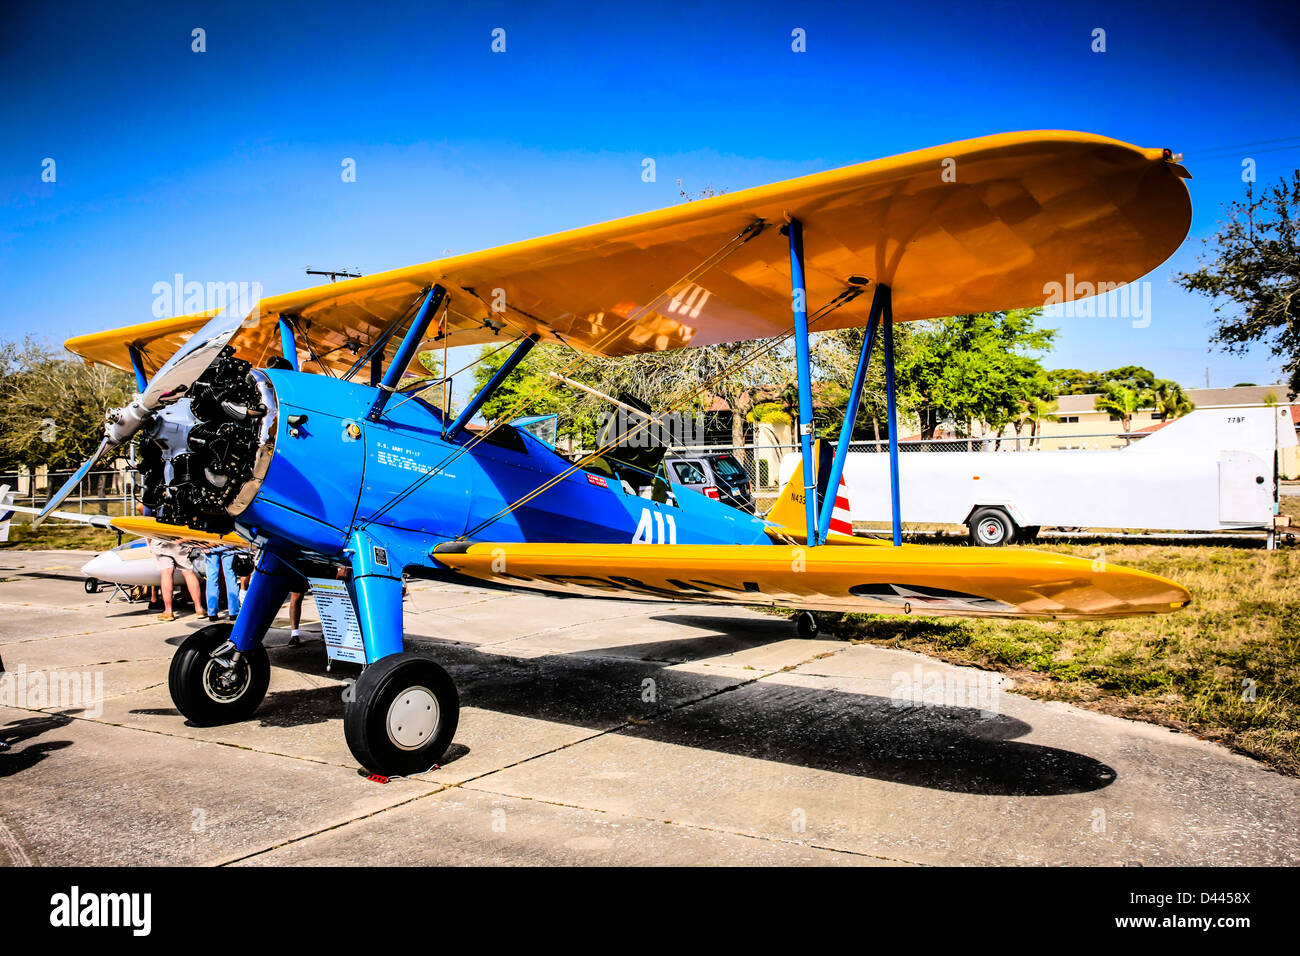 WWII US Army Air Corp PT-17 Steerman training Plane at the Venice Airport open Day Stock Photo